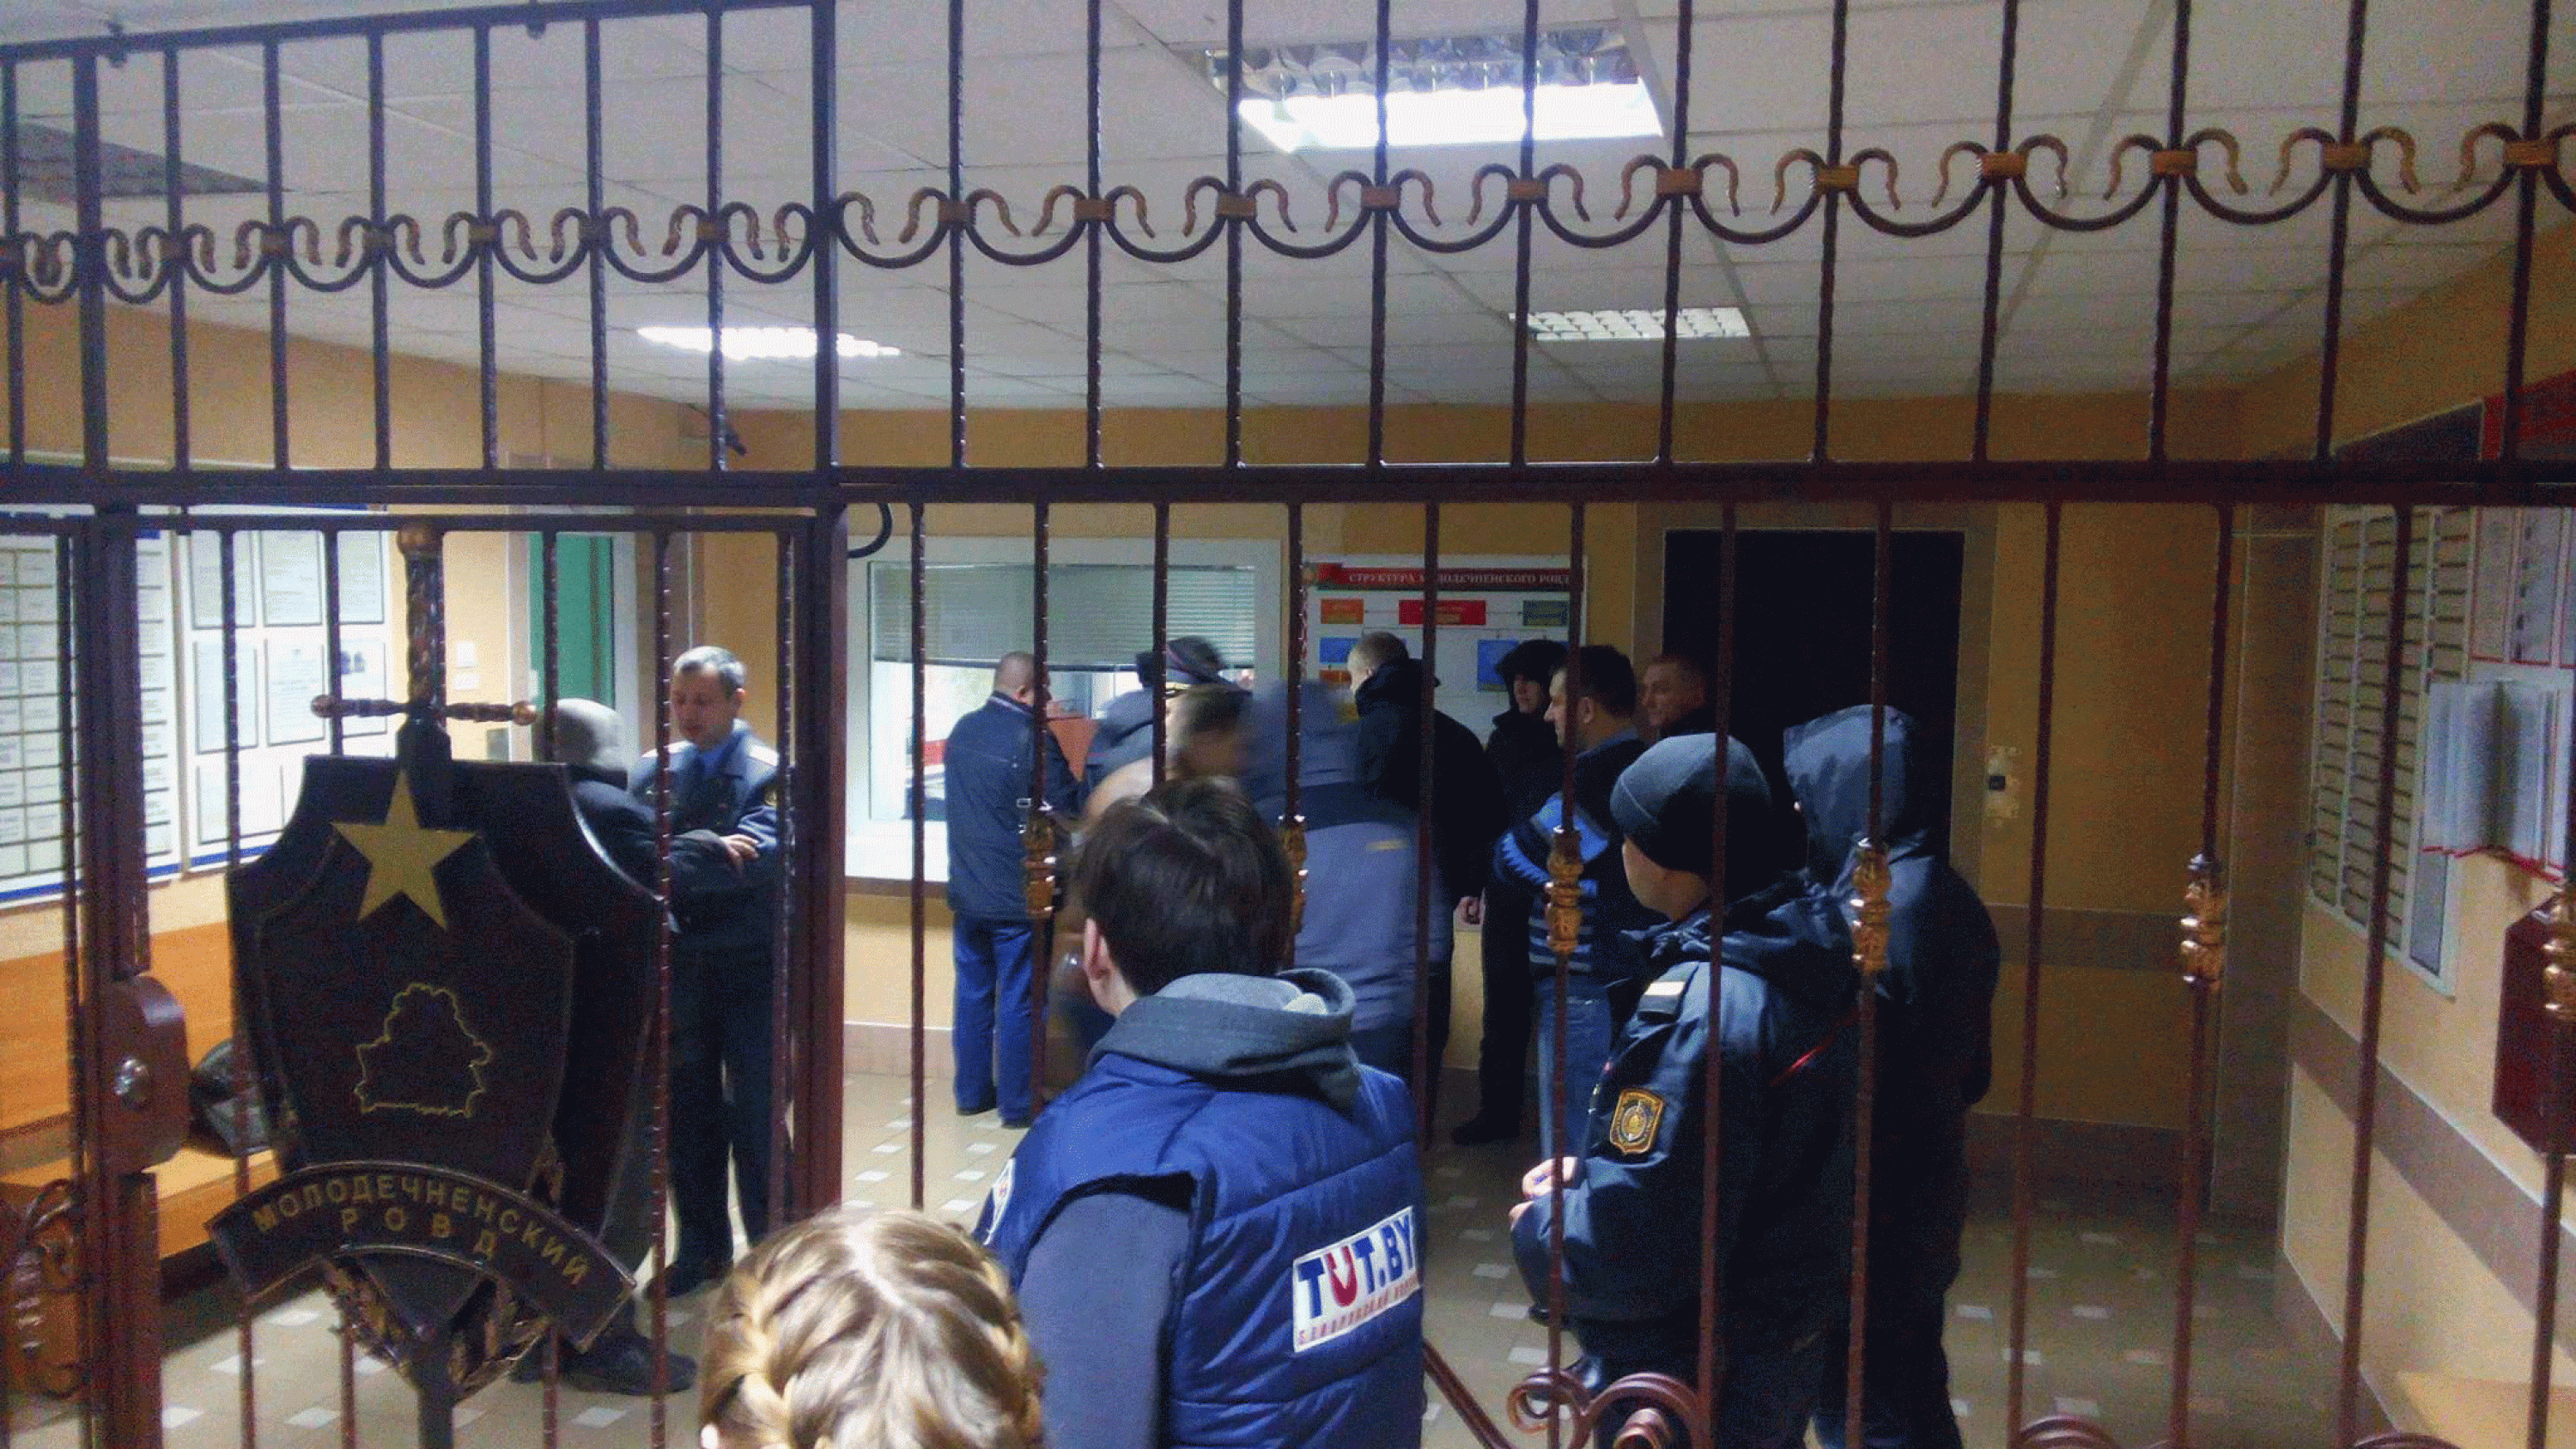 Reporters and observers waiting in the lobby of the Maladziečna city police department after the detention of opposition leaders. March 10, 2017